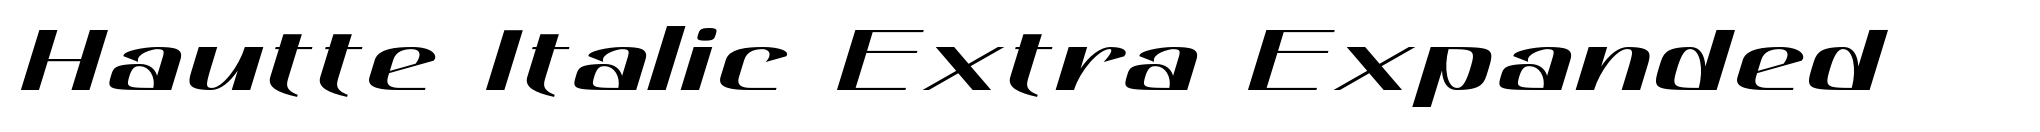 Hautte Italic Extra Expanded image